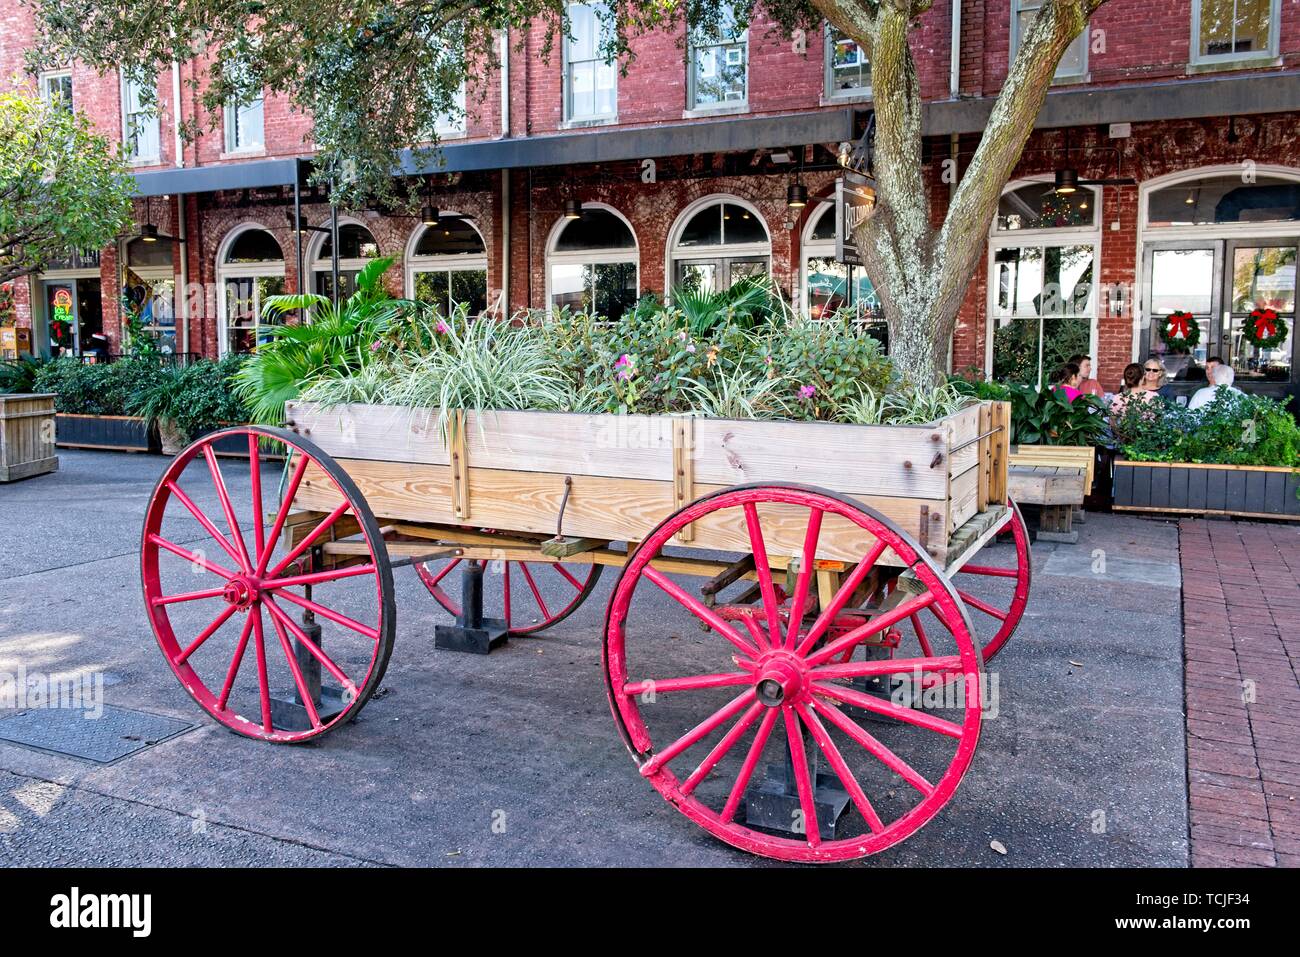 A wagon wheel cart filled with flowers sits in the walk among historic buildings in Savannah, Georgia Stock Photo